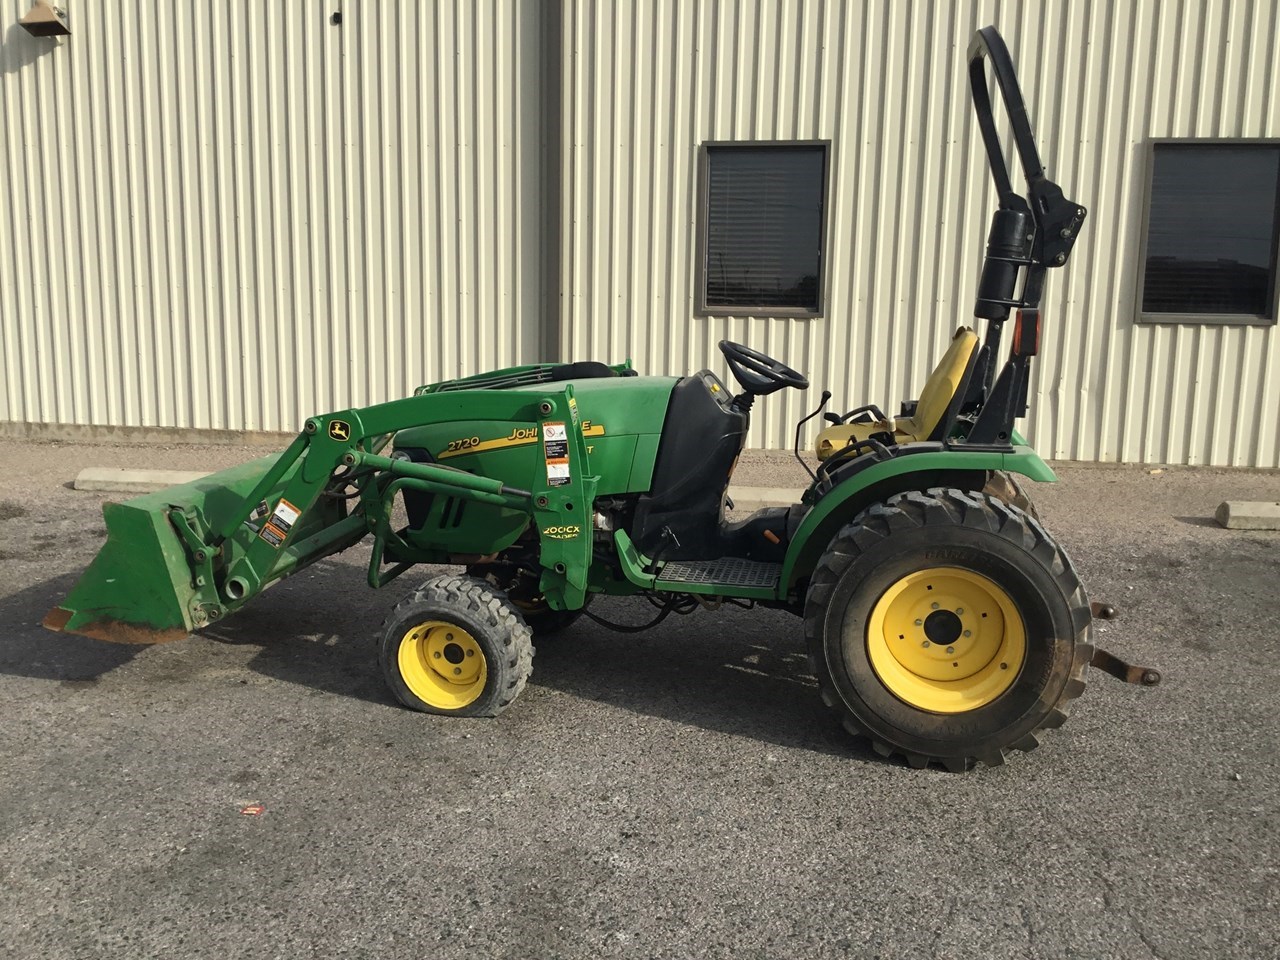 John Deere 2720 Cut Compact Utility Tractor For Sale In Durant Oklahoma 9048